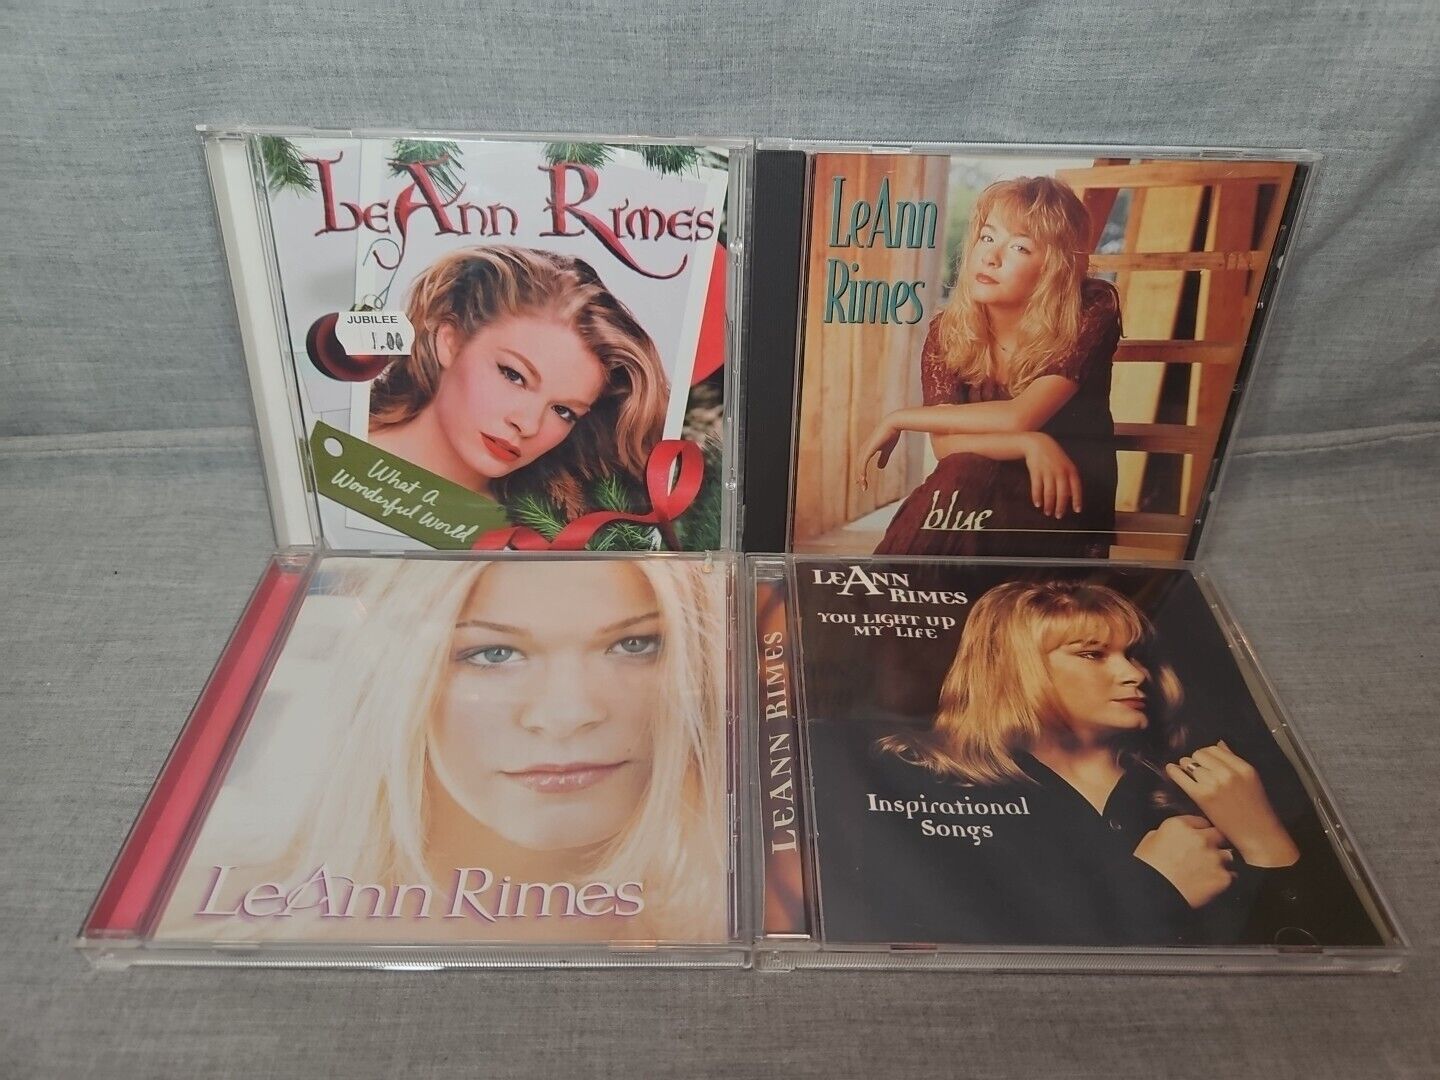 Primary image for Lotto di 4 CD di LeAnn Rimes: What a Wonderful World, Blue, You Light Up My...